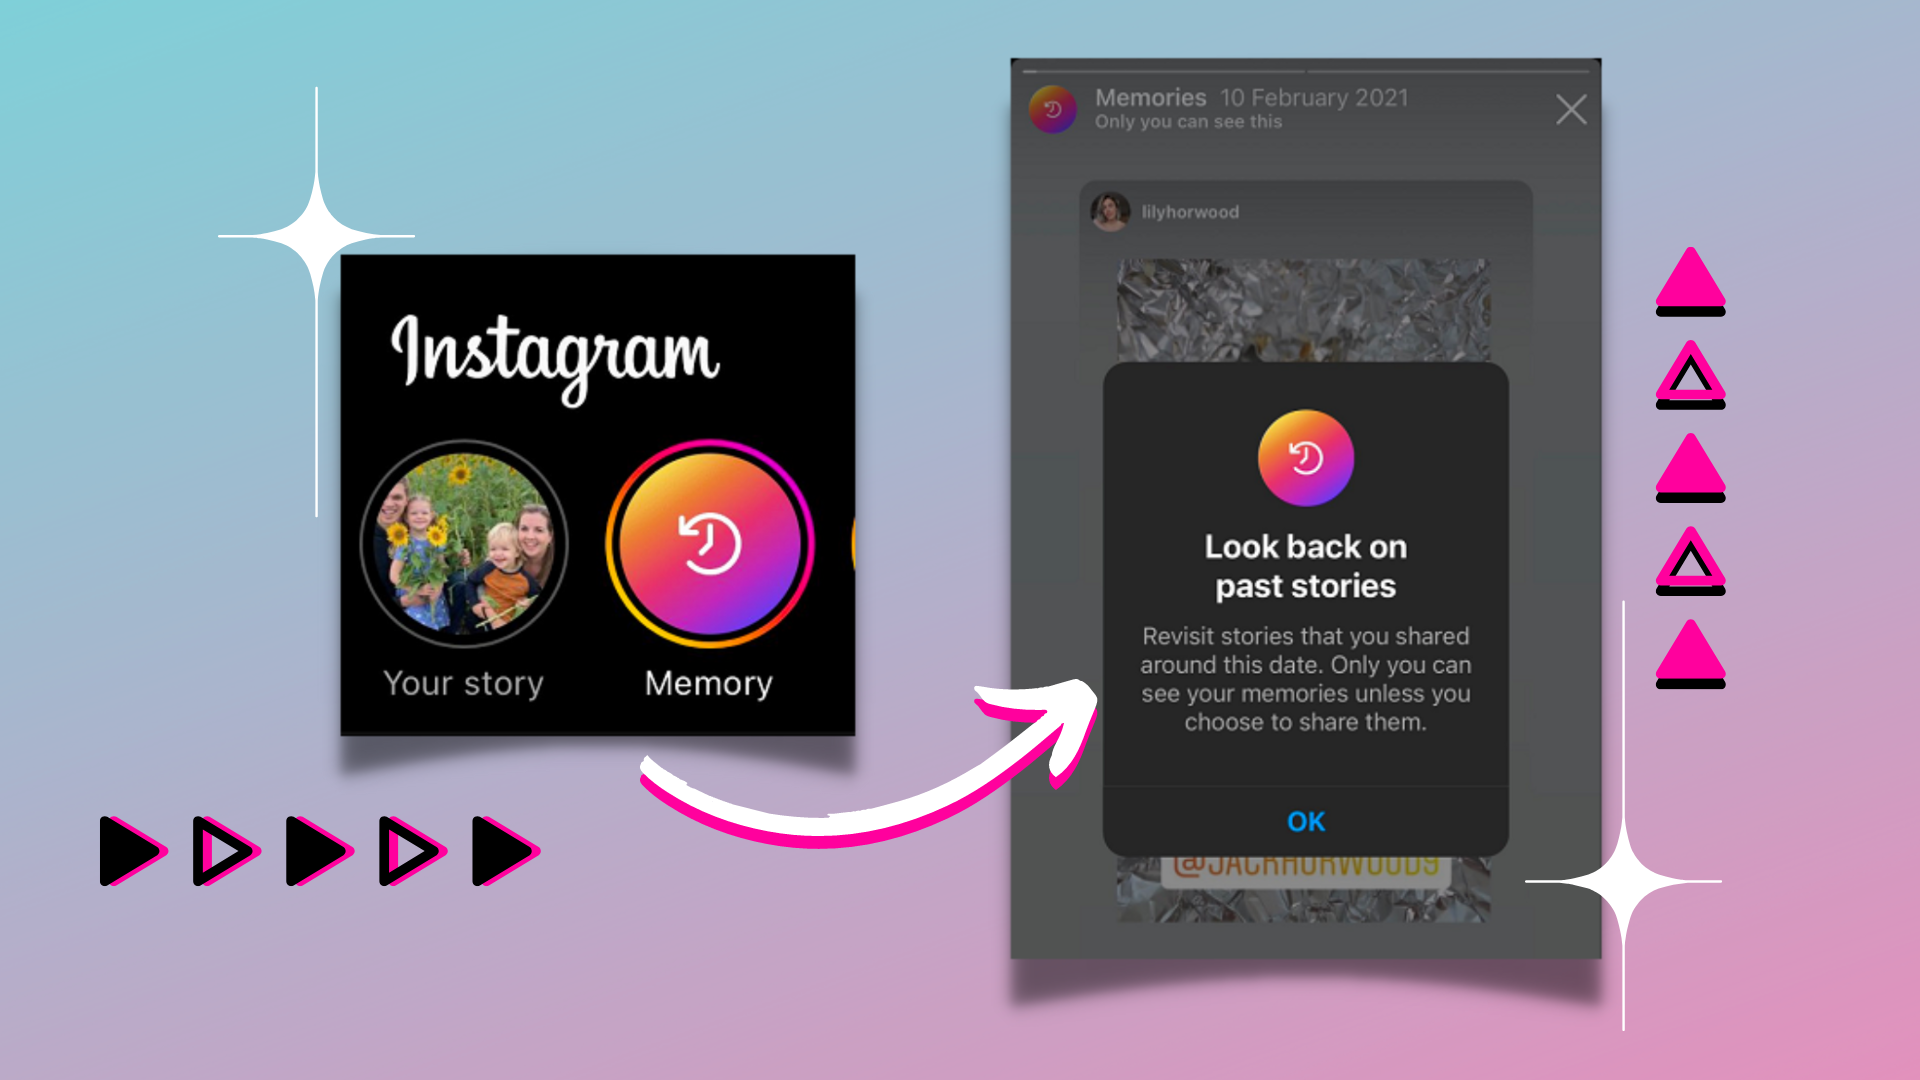 How to See Memories on Instagram?